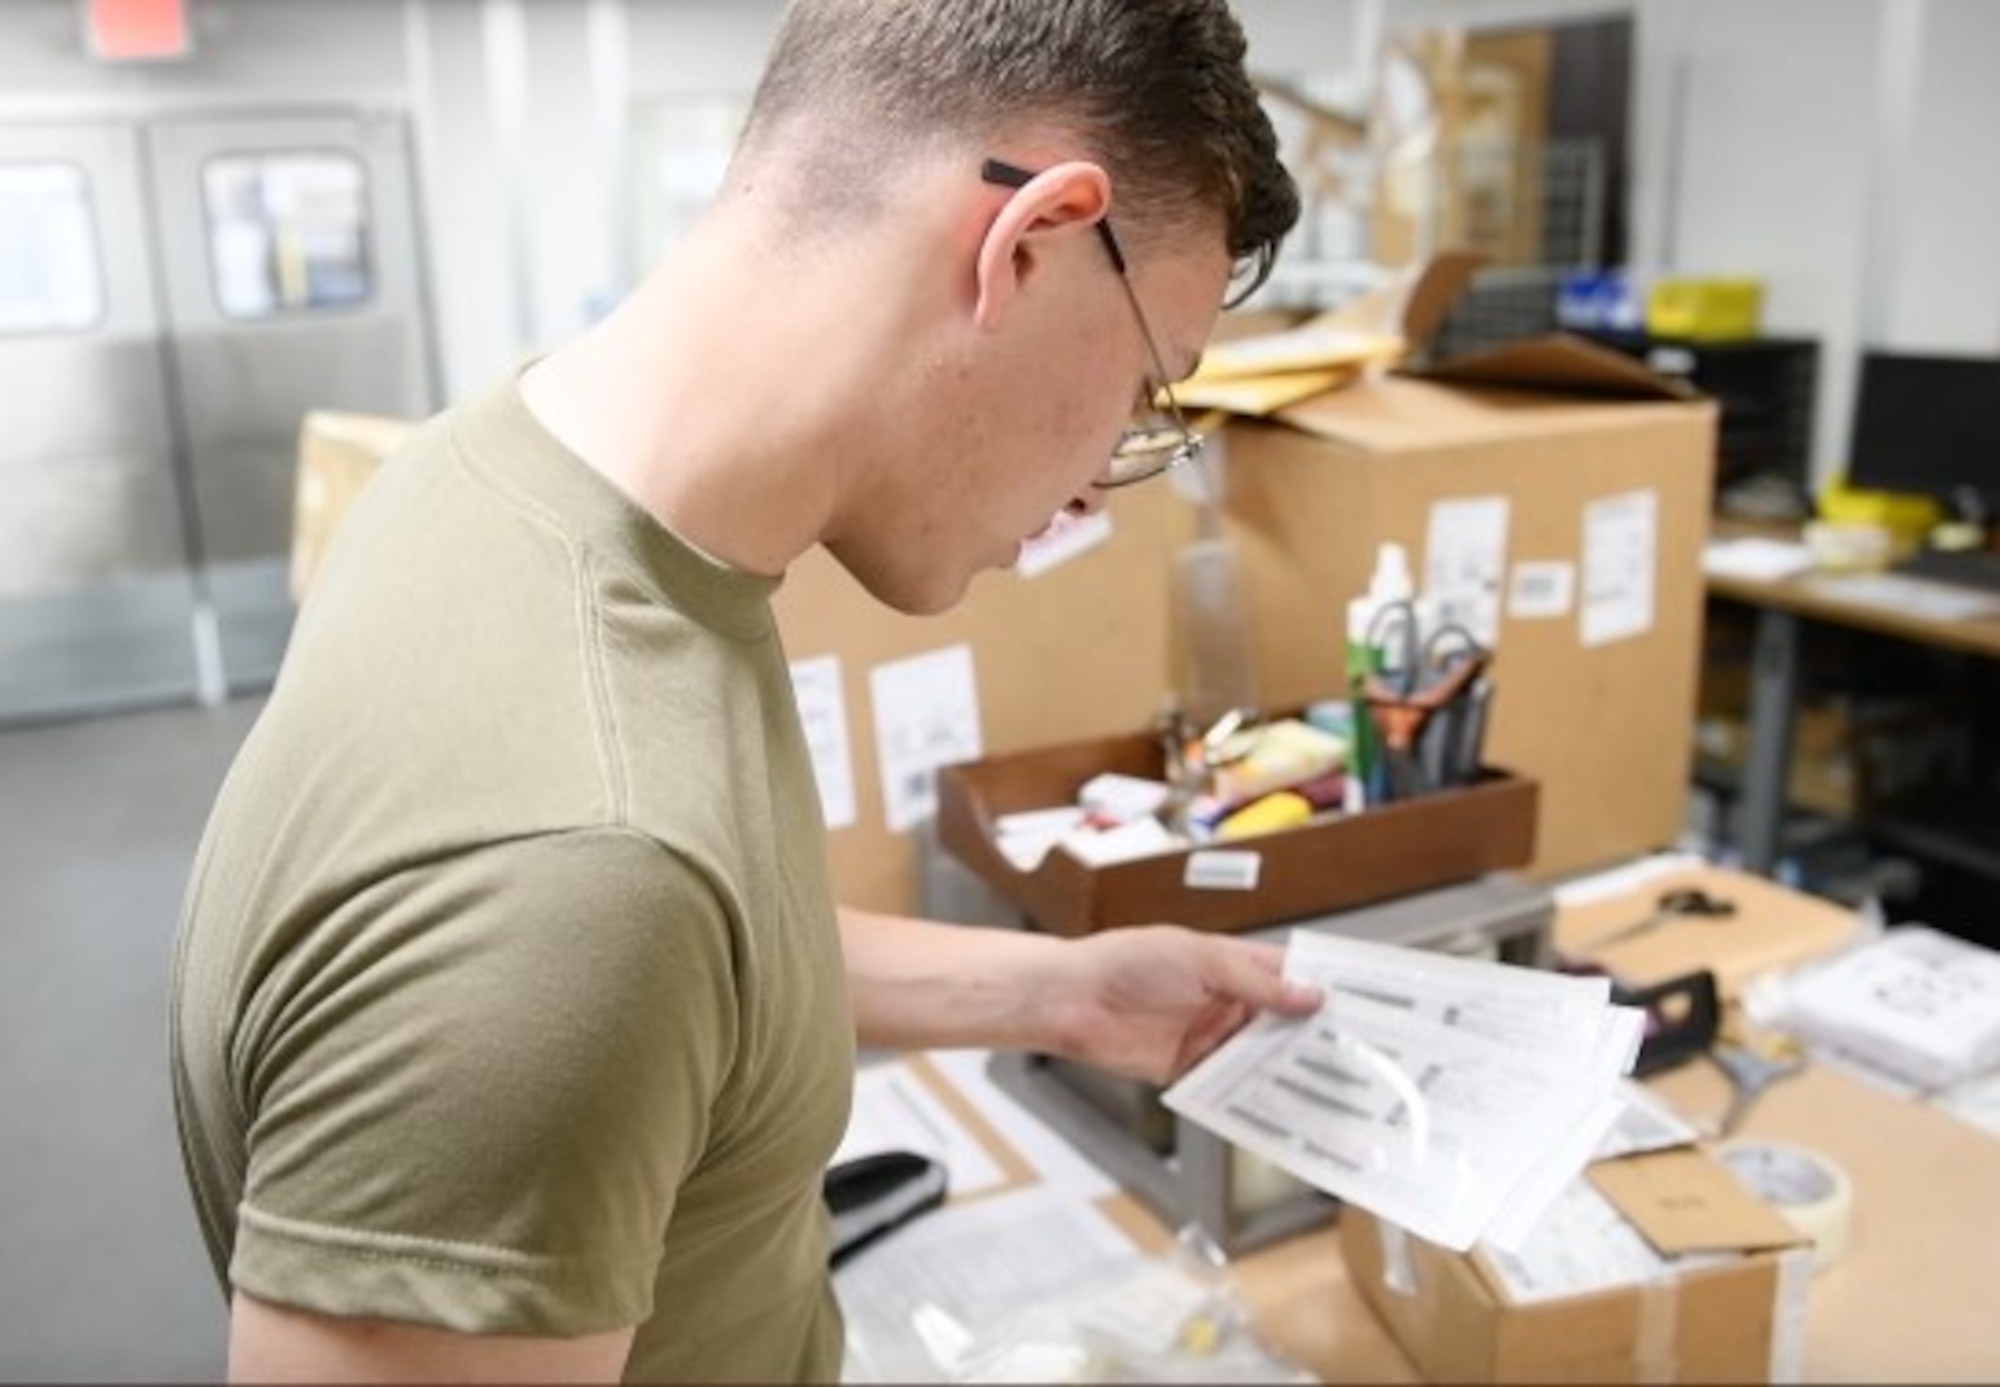 Airman 1st Class Brett Tristen, 56th Logistics Readiness Squadron Traffic Management Office (TMO) inbound receiver, reviews a due out release (DOR) form, March 27, 2020, at Luke Air Force Base, Ariz. DOR forms help identify the location and unit where the package is projected to be delivered to the customer. TMO Airmen support the mission by managing and transporting equipment necessary to train the world’s greatest fighter pilots and combat ready Airmen. (U.S. Air Force photo by Airman Tyler Jansen